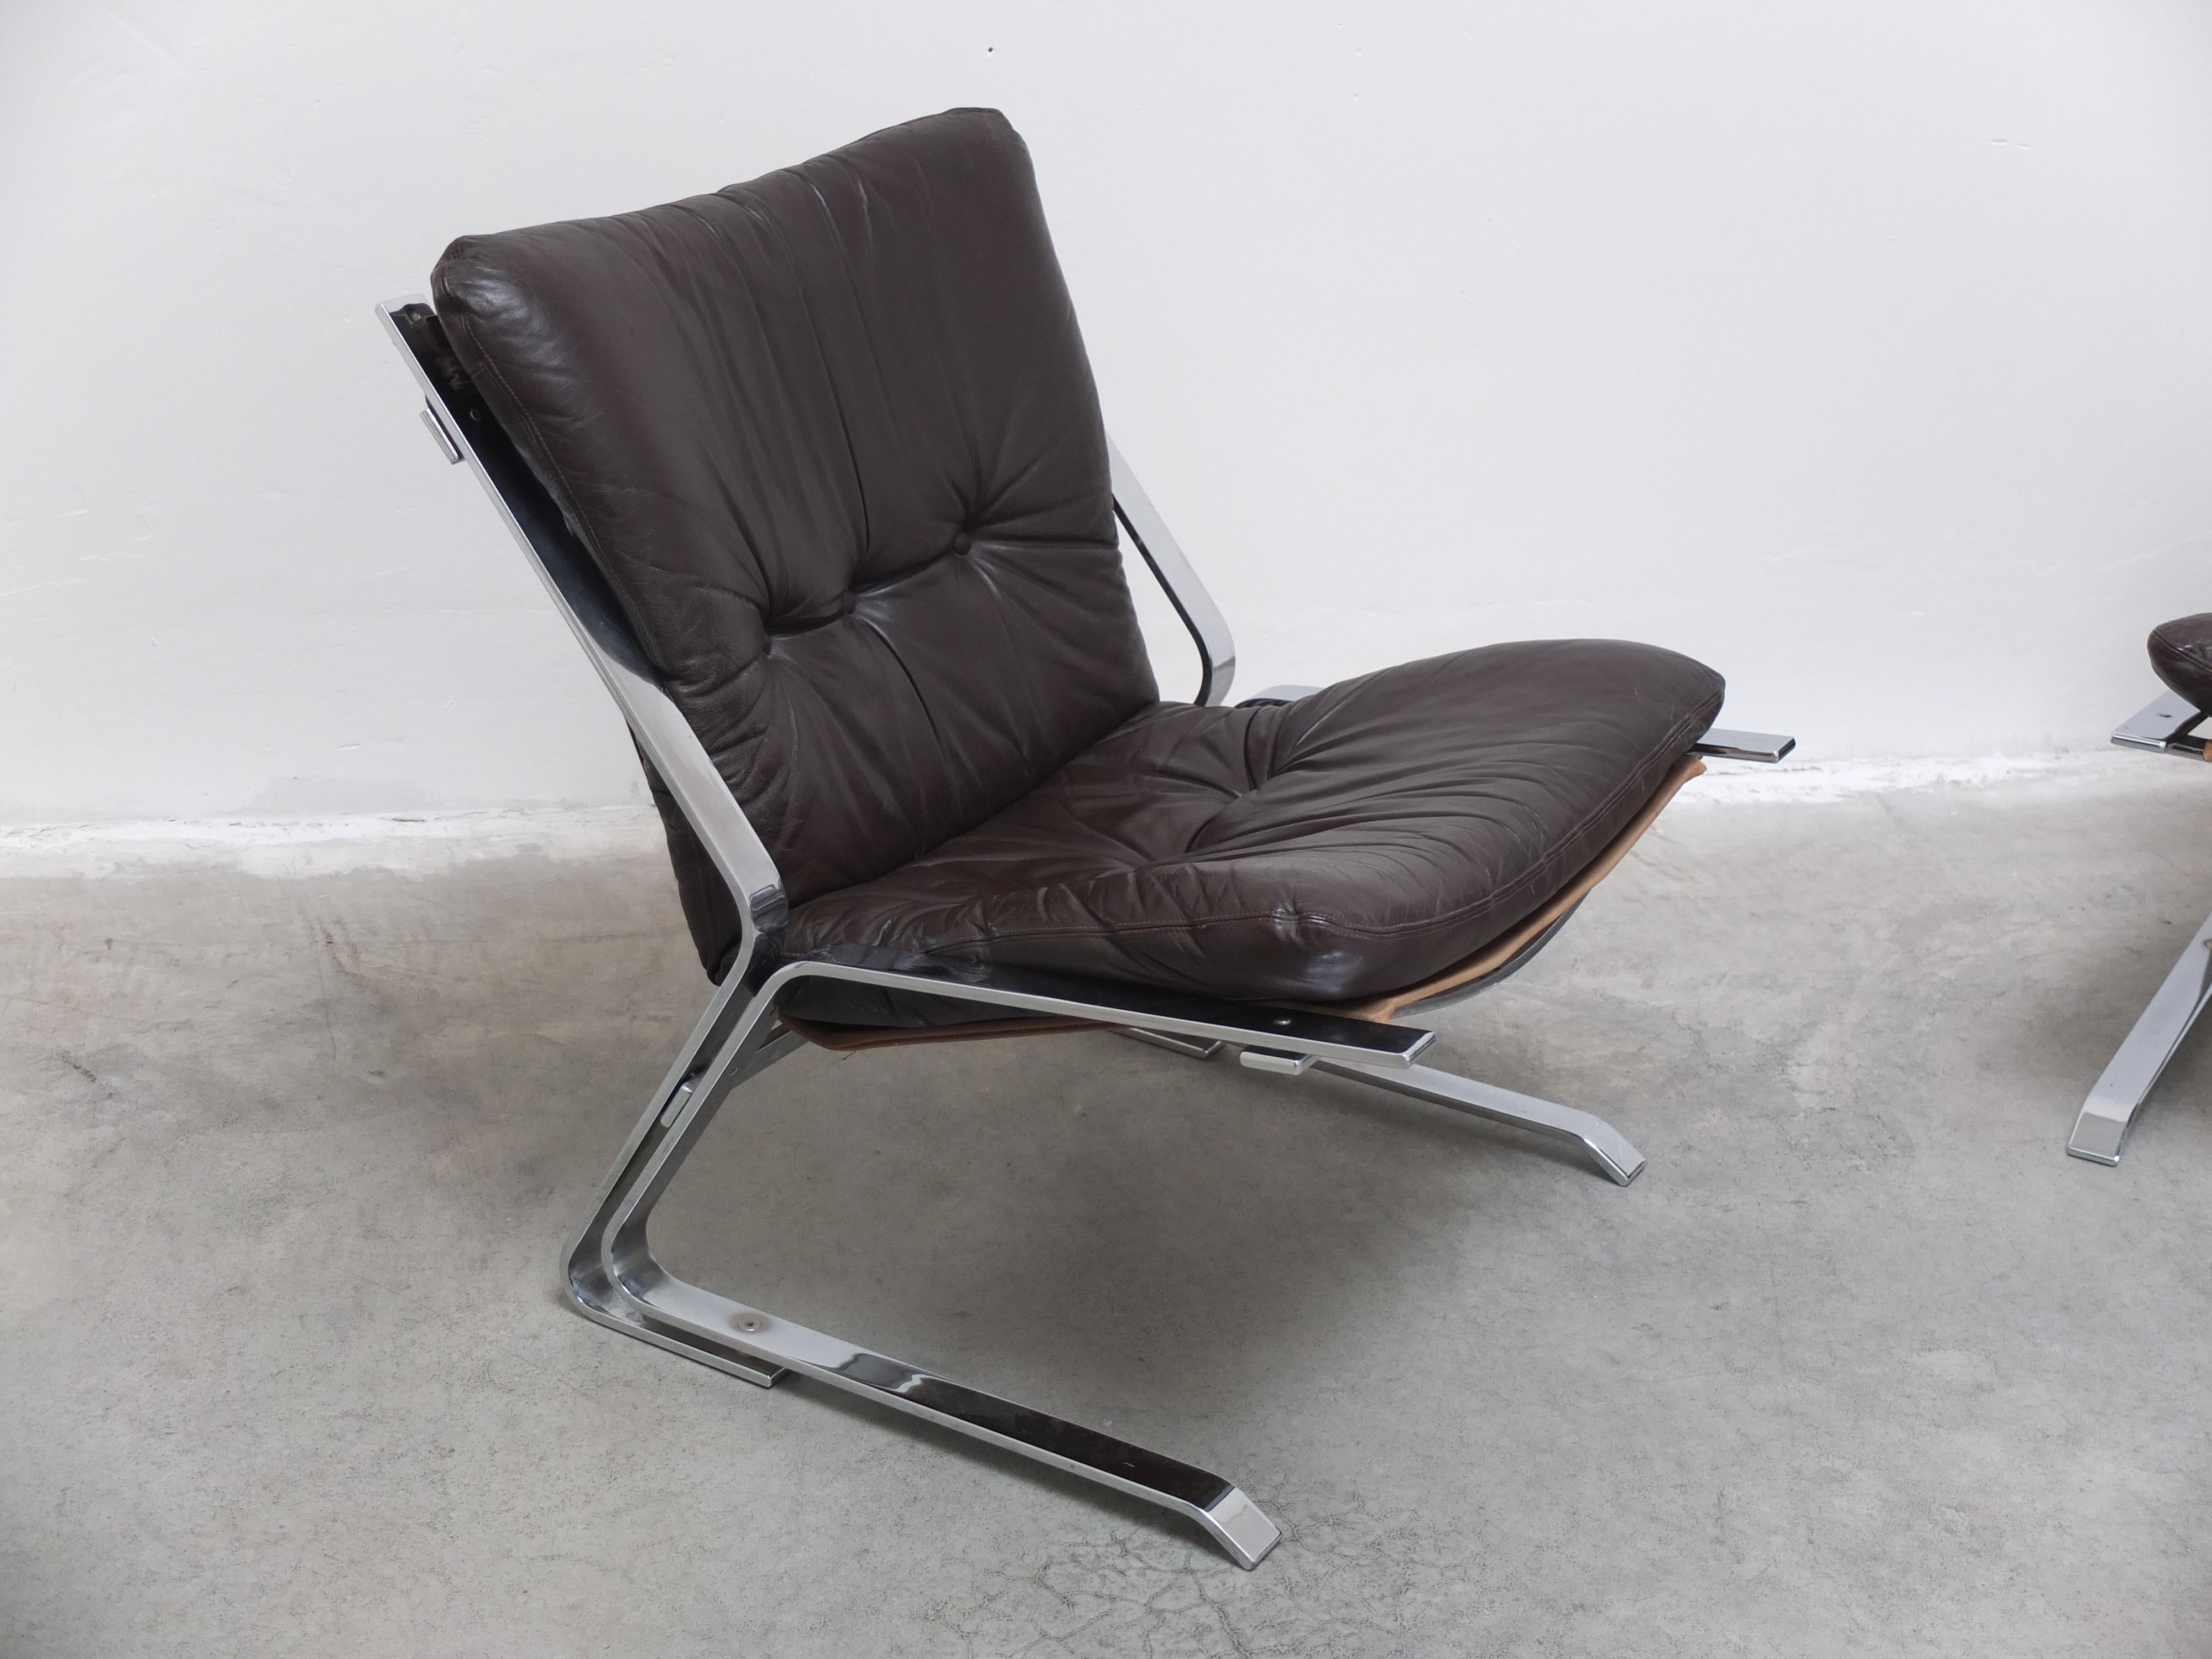 Rare Pair of 'Pirate' Lounge Chairs by Elsa & Nordahl Solheim for Rykken, 1960s For Sale 1